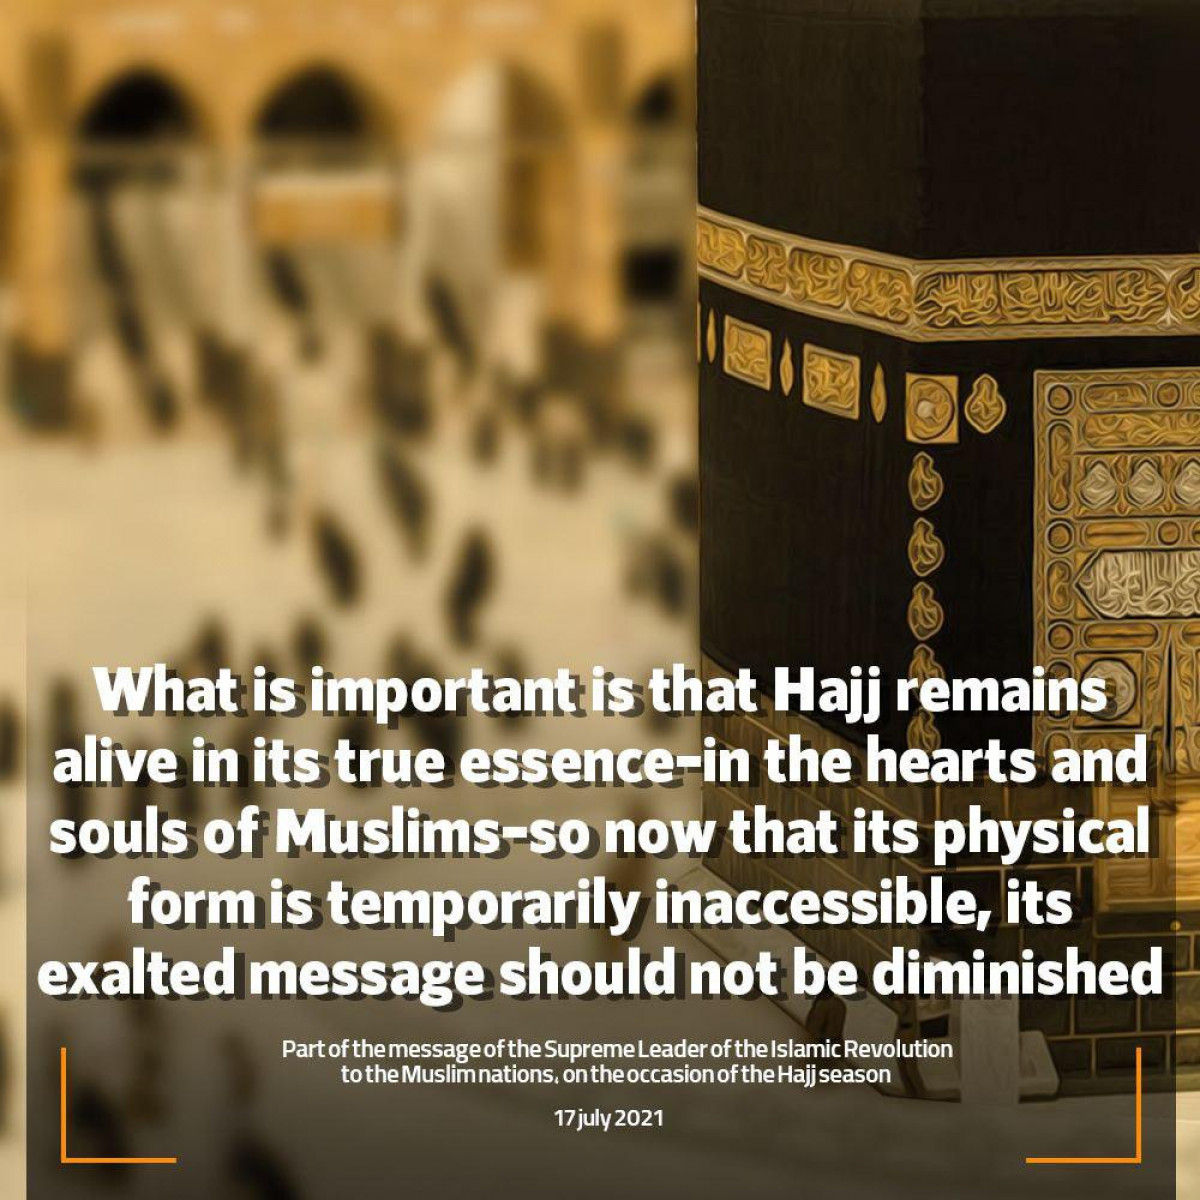 What is important is that Hajj remains alive in its true essence in the hearts and souls of Muslims